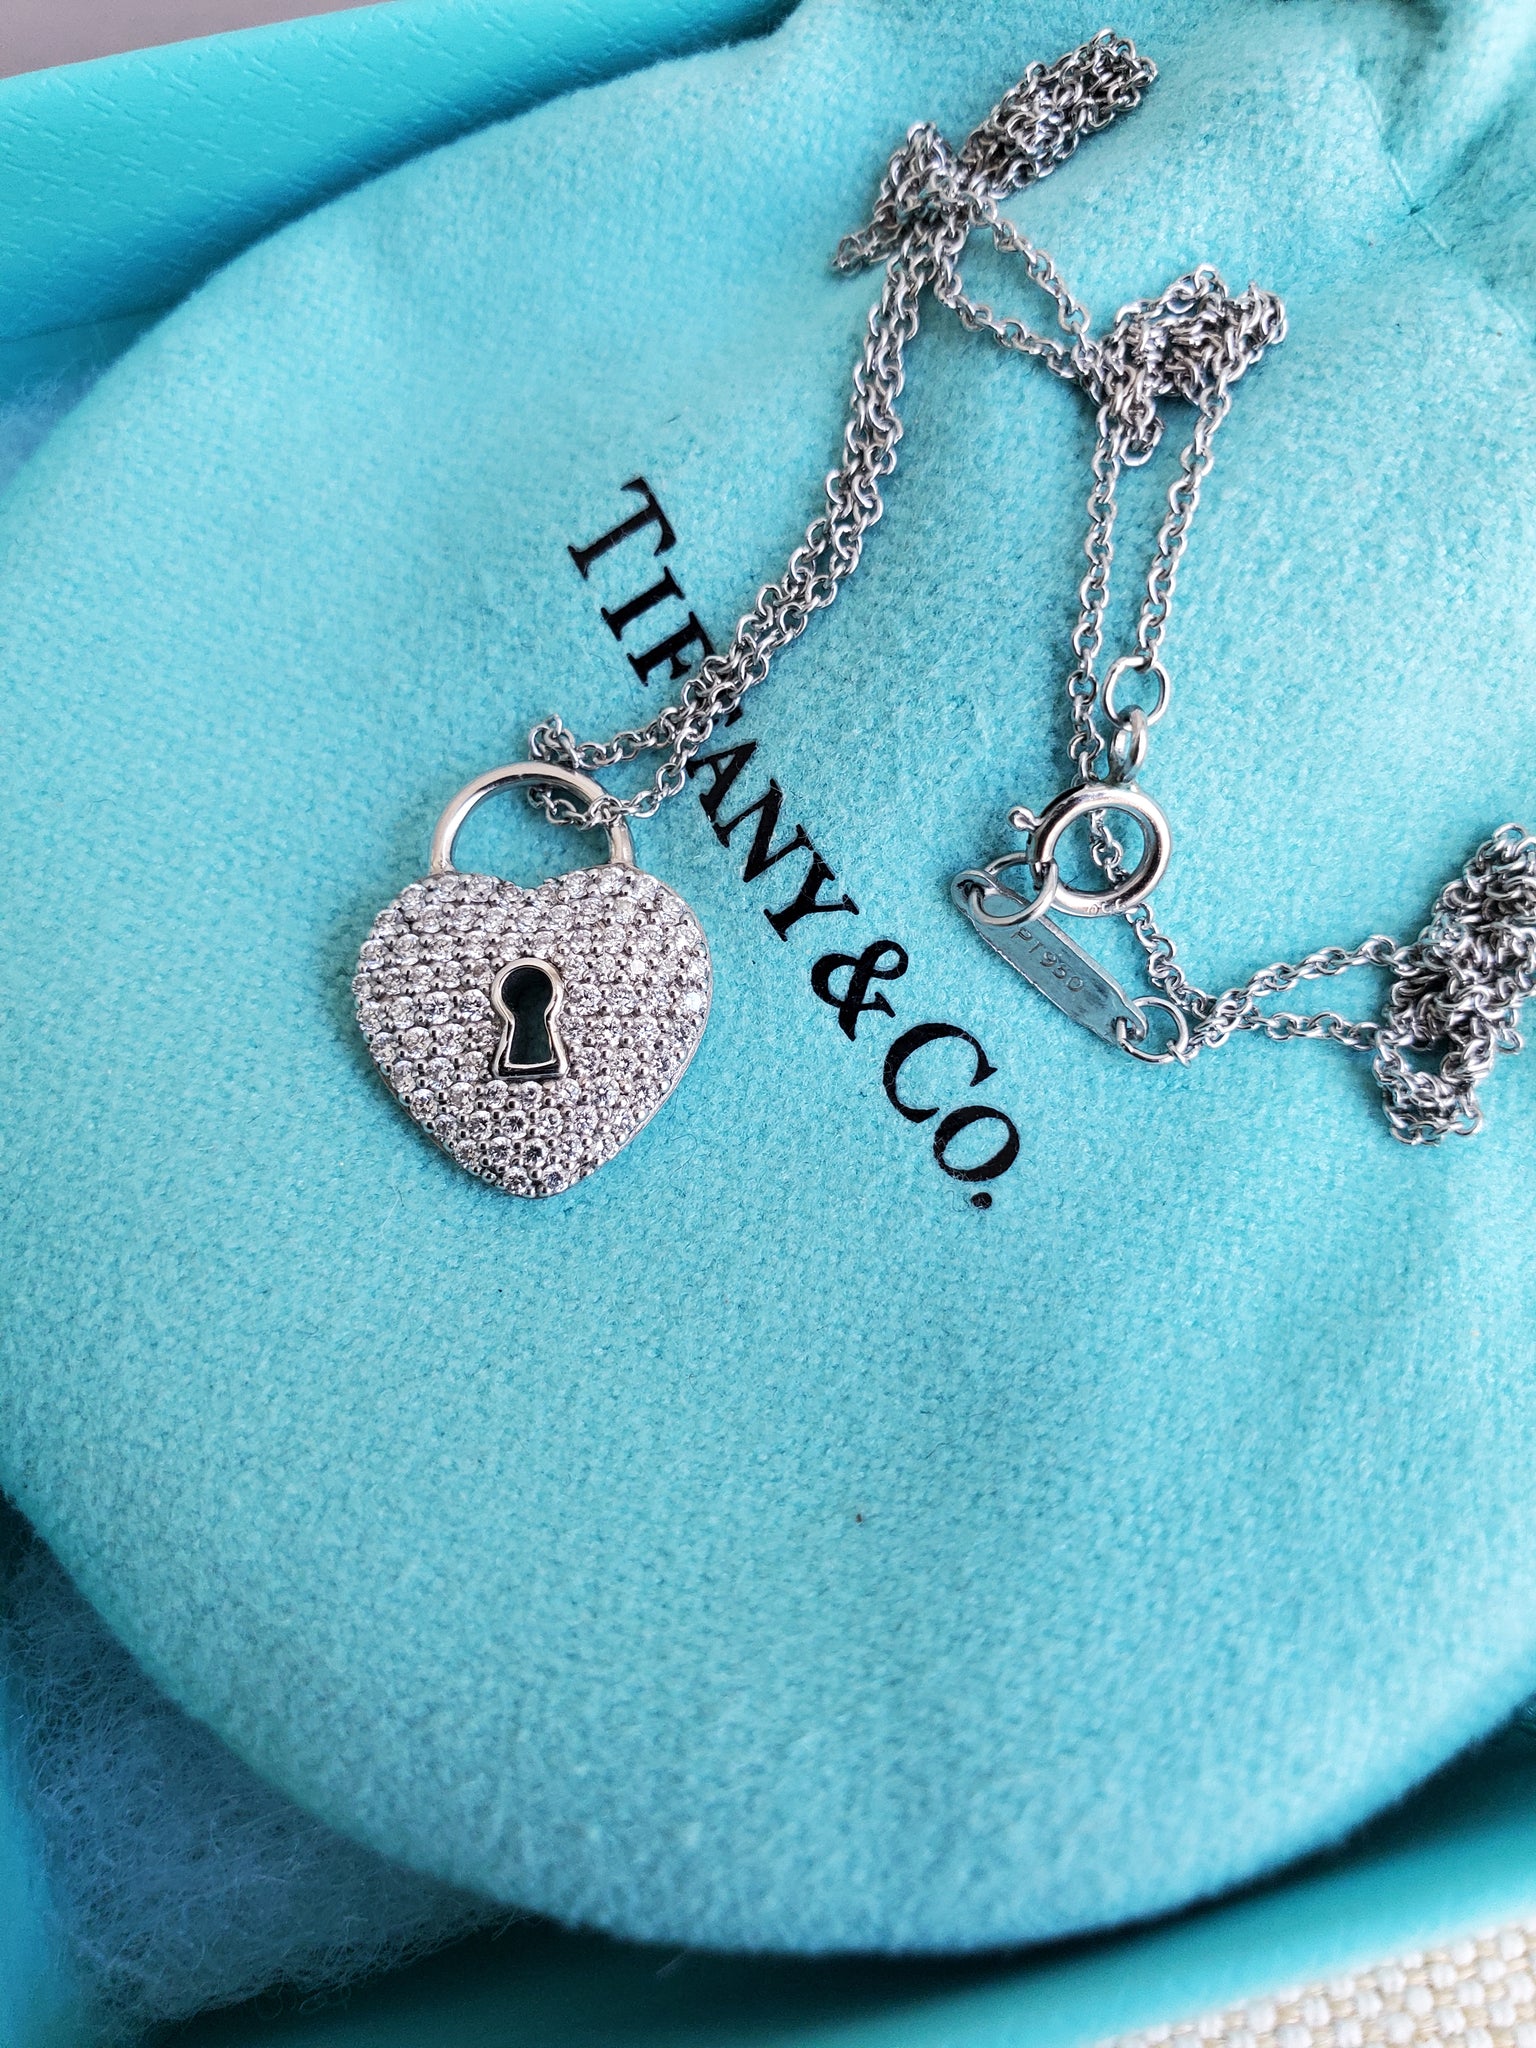 Tiffany & Co. Tiffany Locks vintage round lock pendant in sterling silver  on a chain